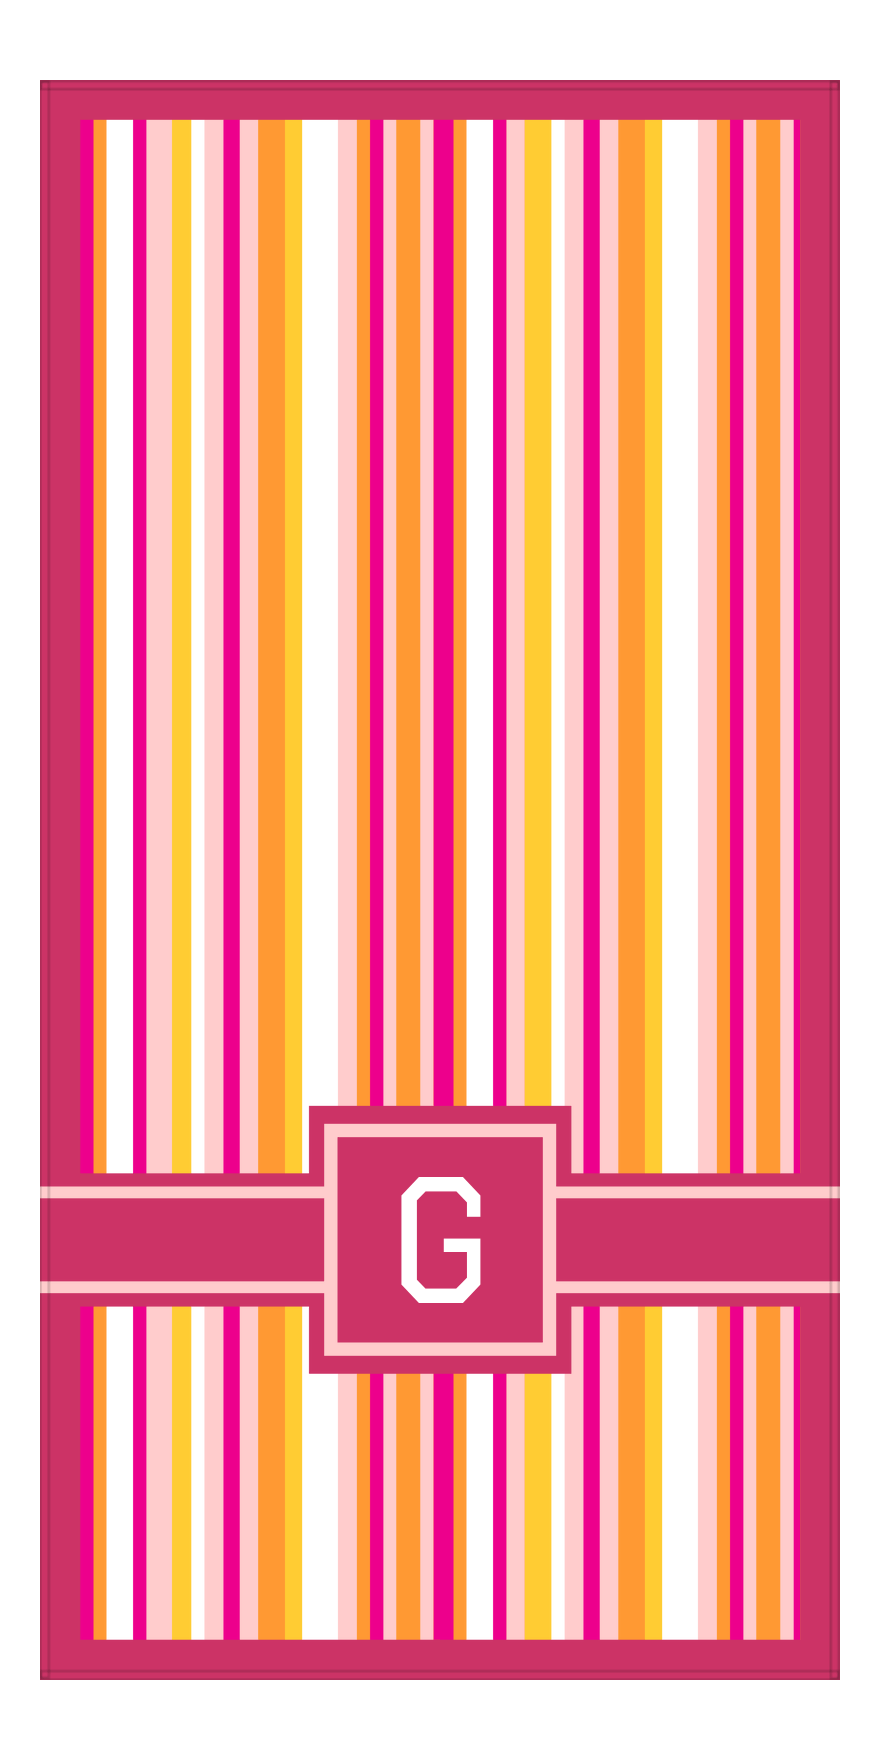 Personalized 5 Color Stripes 2 Repeat Beach Towel - Vertical - Pink and Orange - Square with Ribbon Off Center Frame - Front View